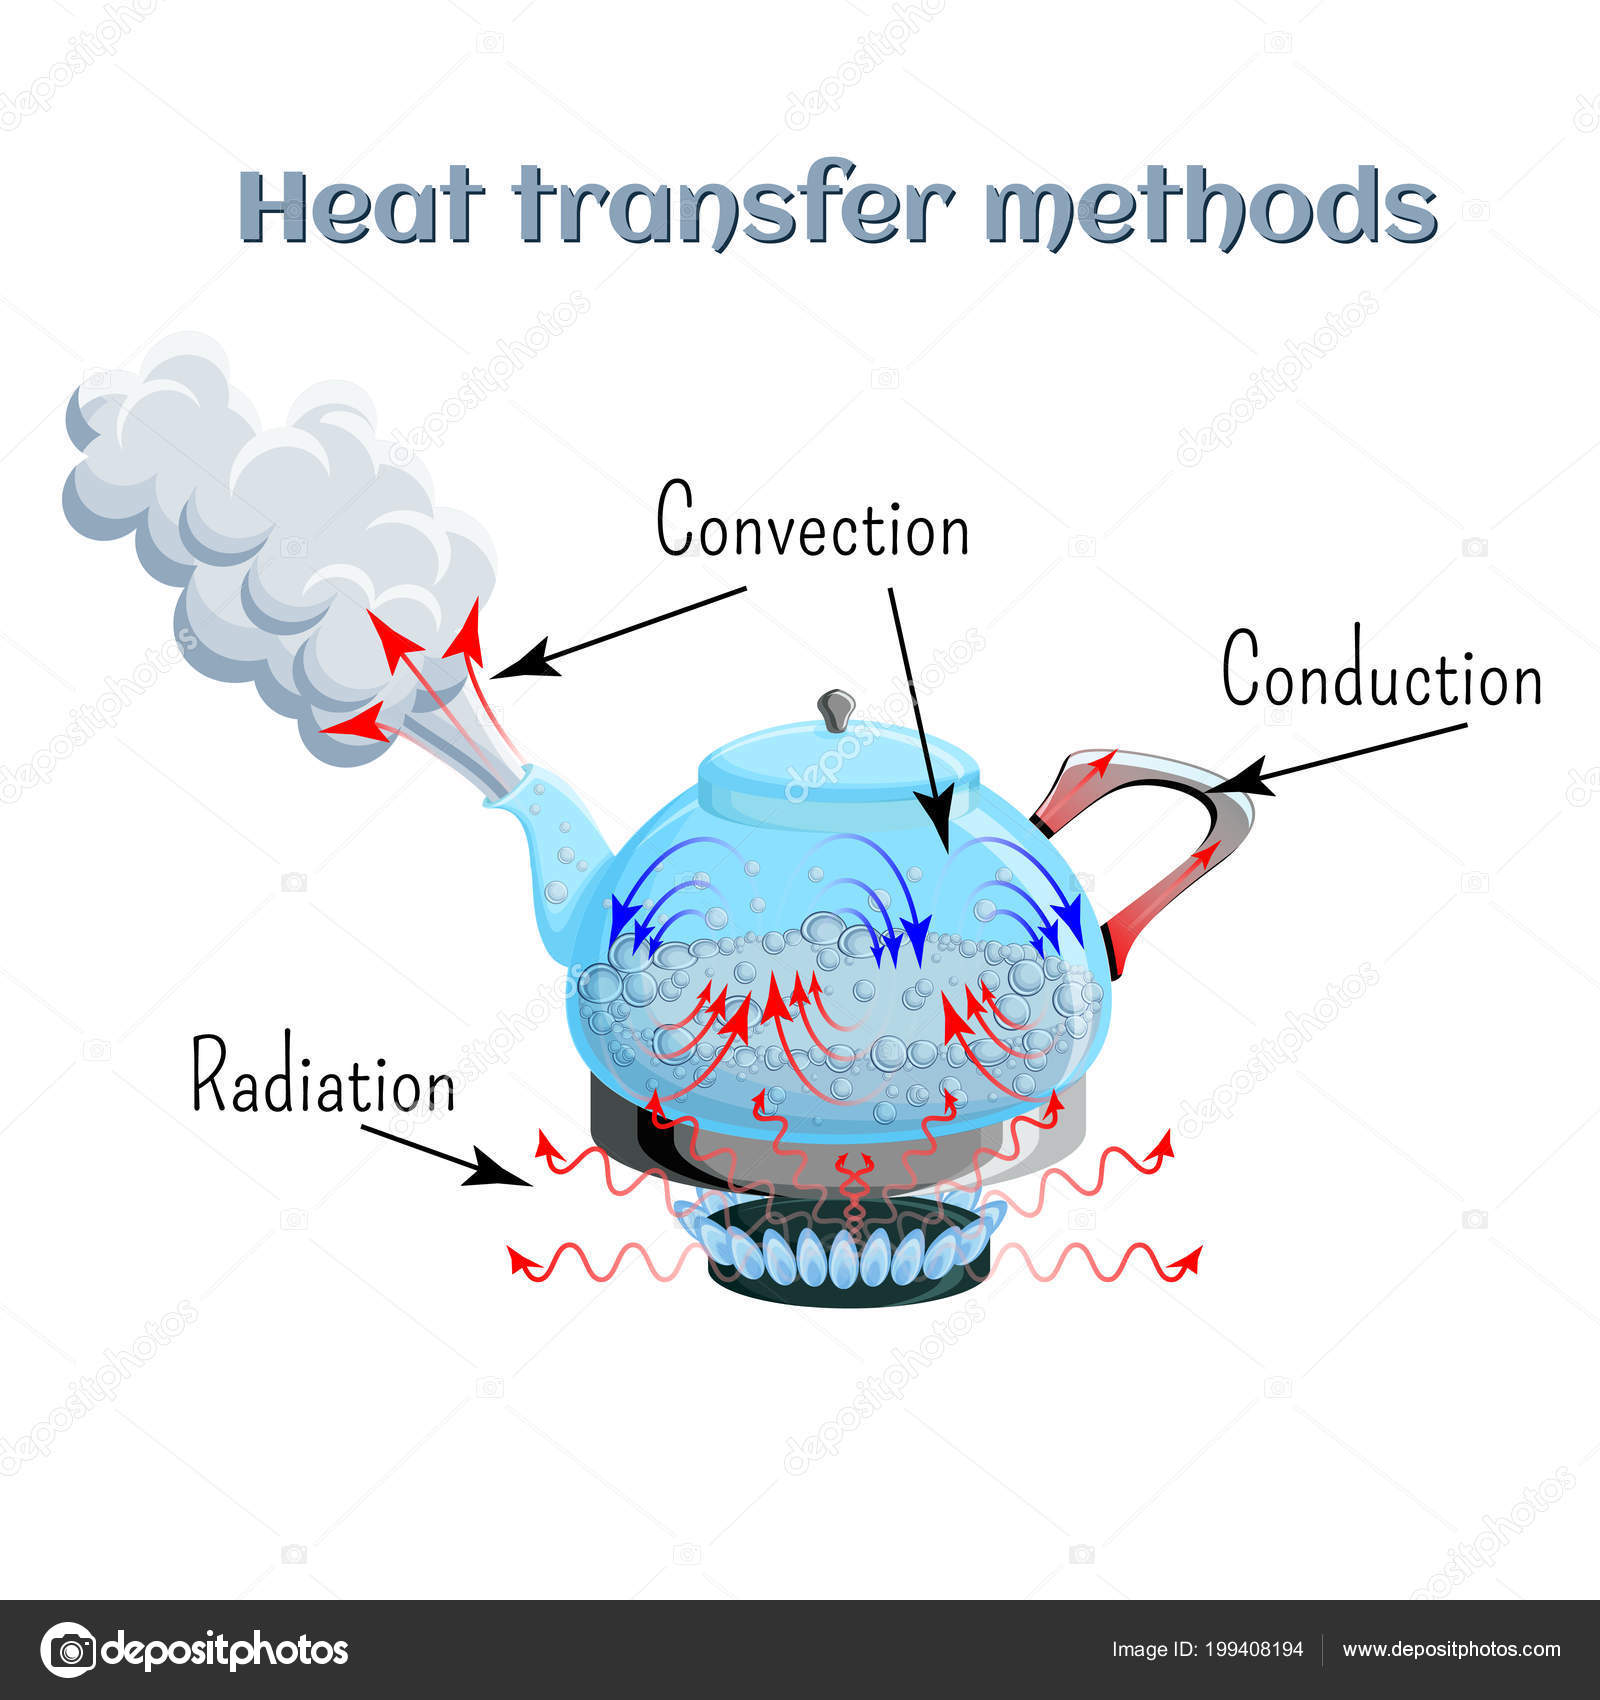 Convection Convection: Learn